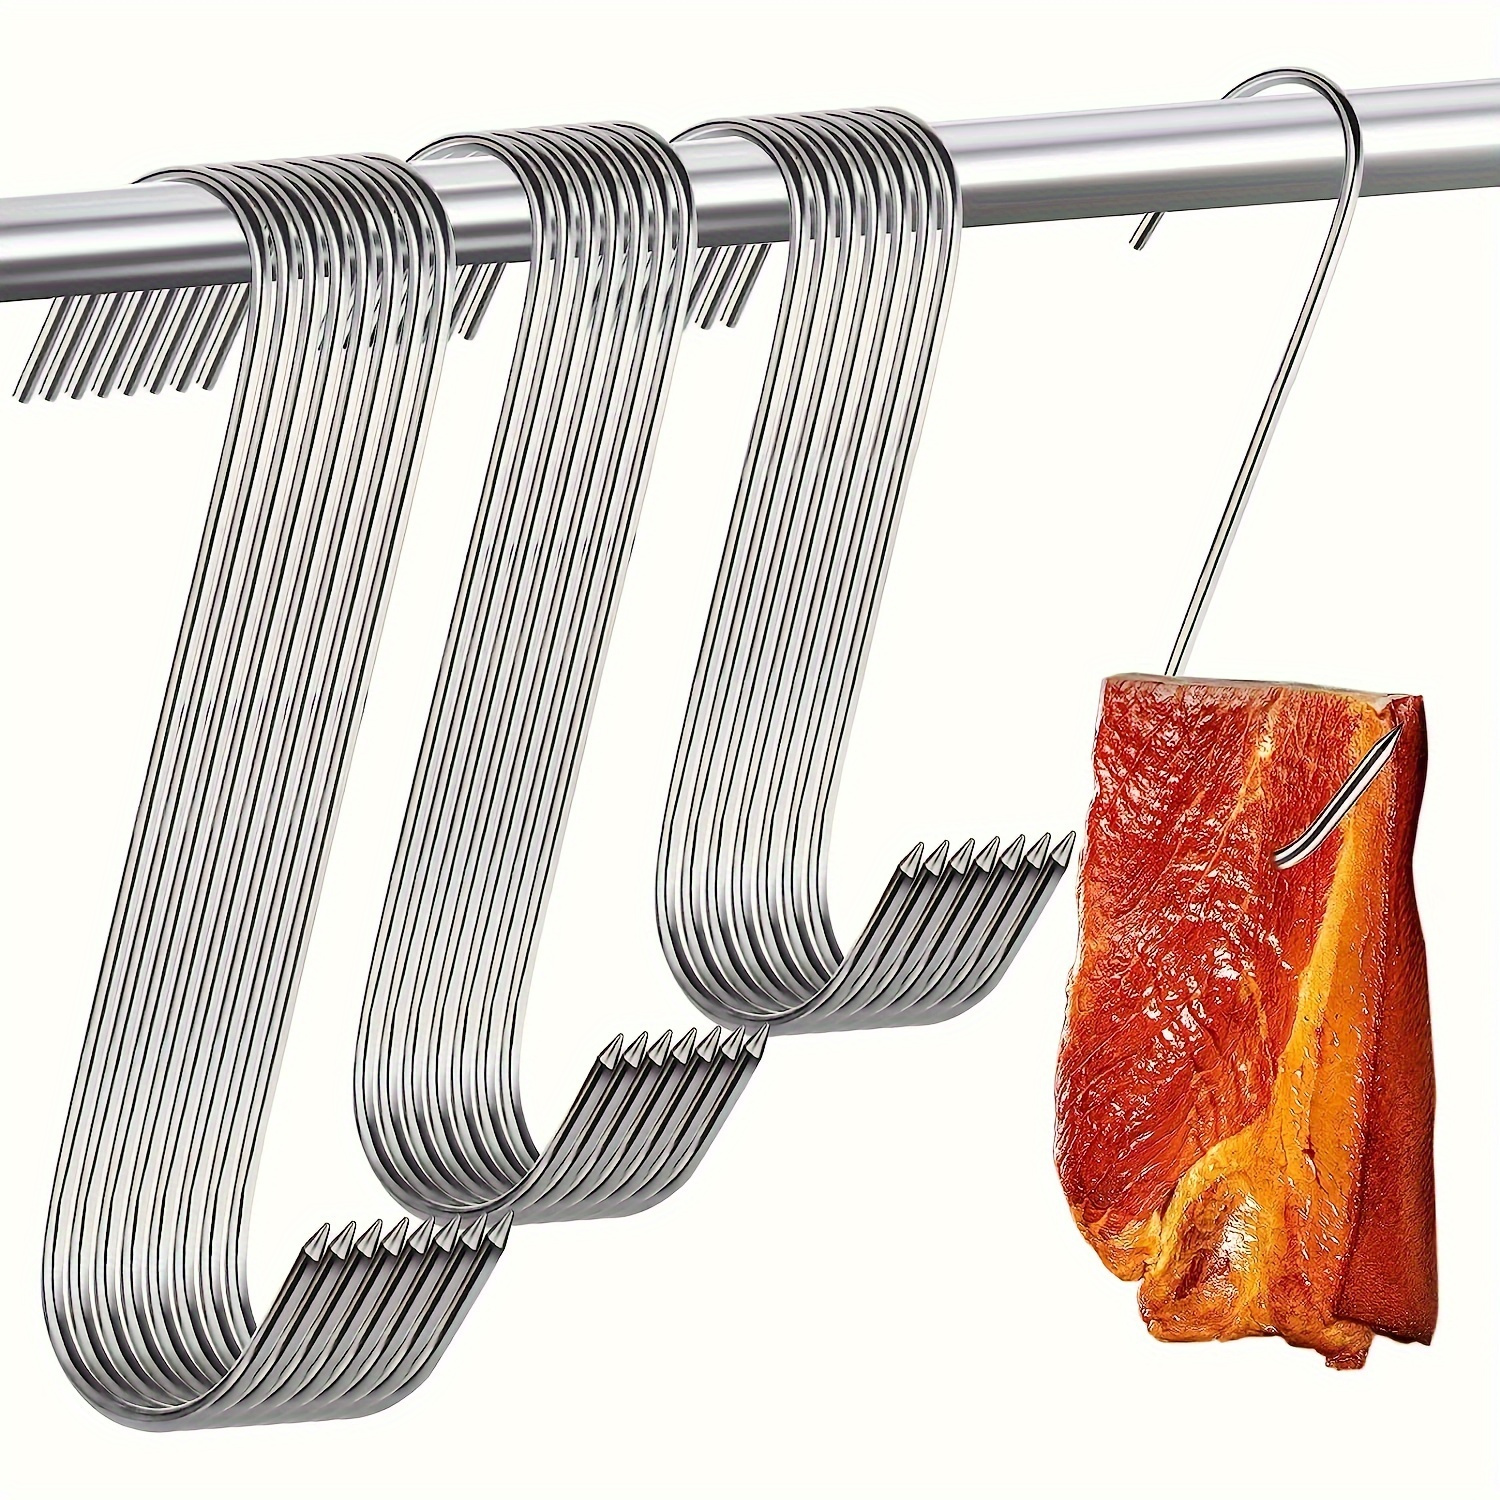 Meat hooks, tin plated - Meat hooks & S-hooks - Steel wire ropes